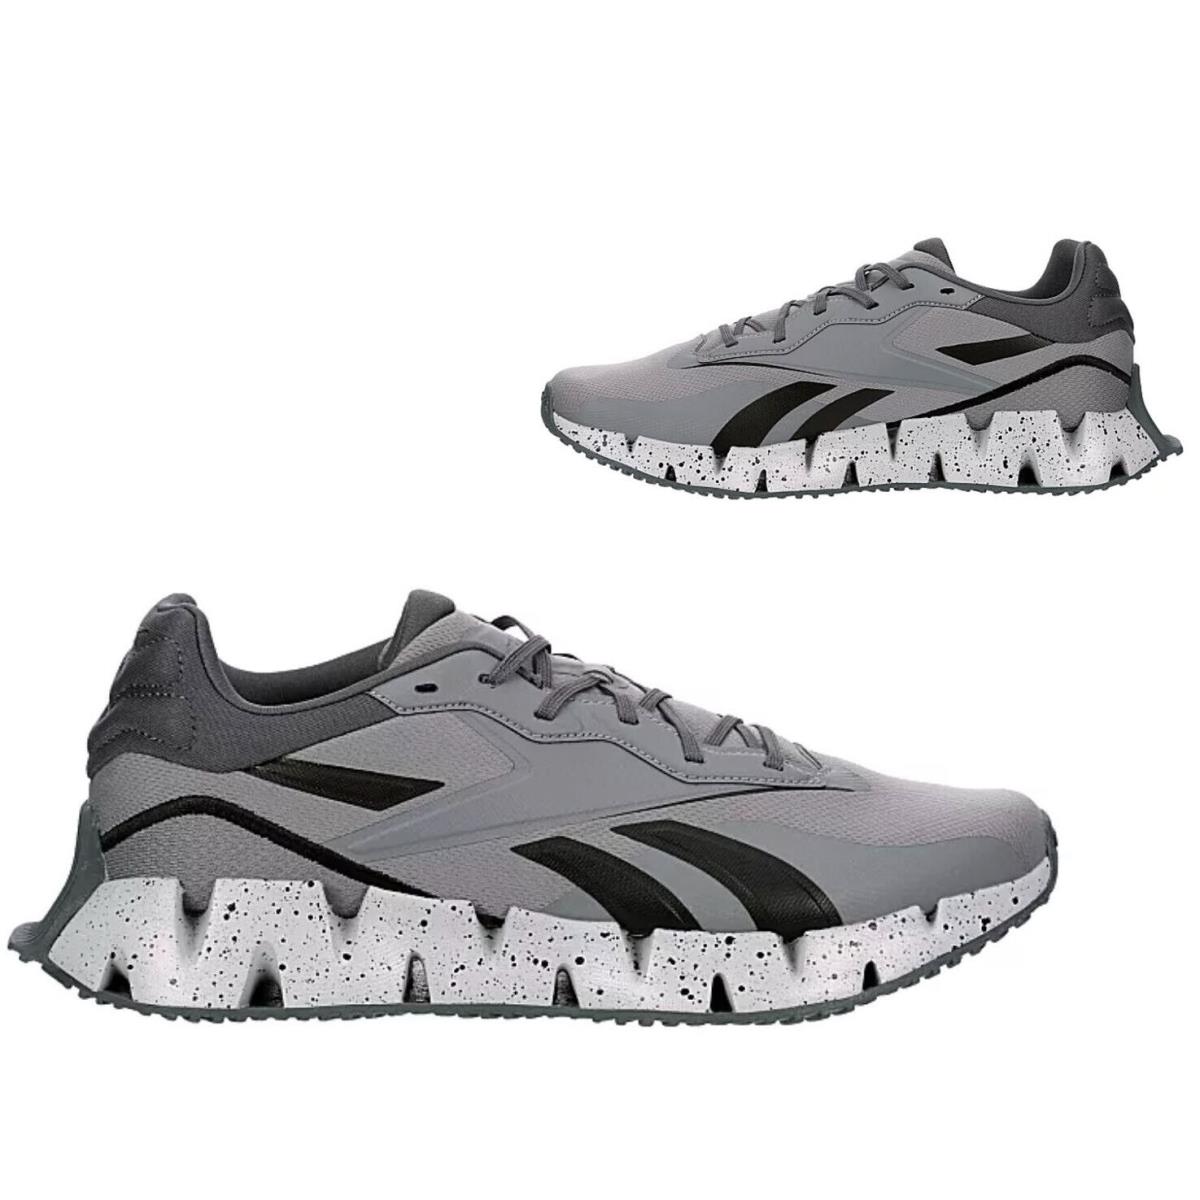 Reebok Athletic Sneakers Mens Casual Shoes Gray Black All Sizes